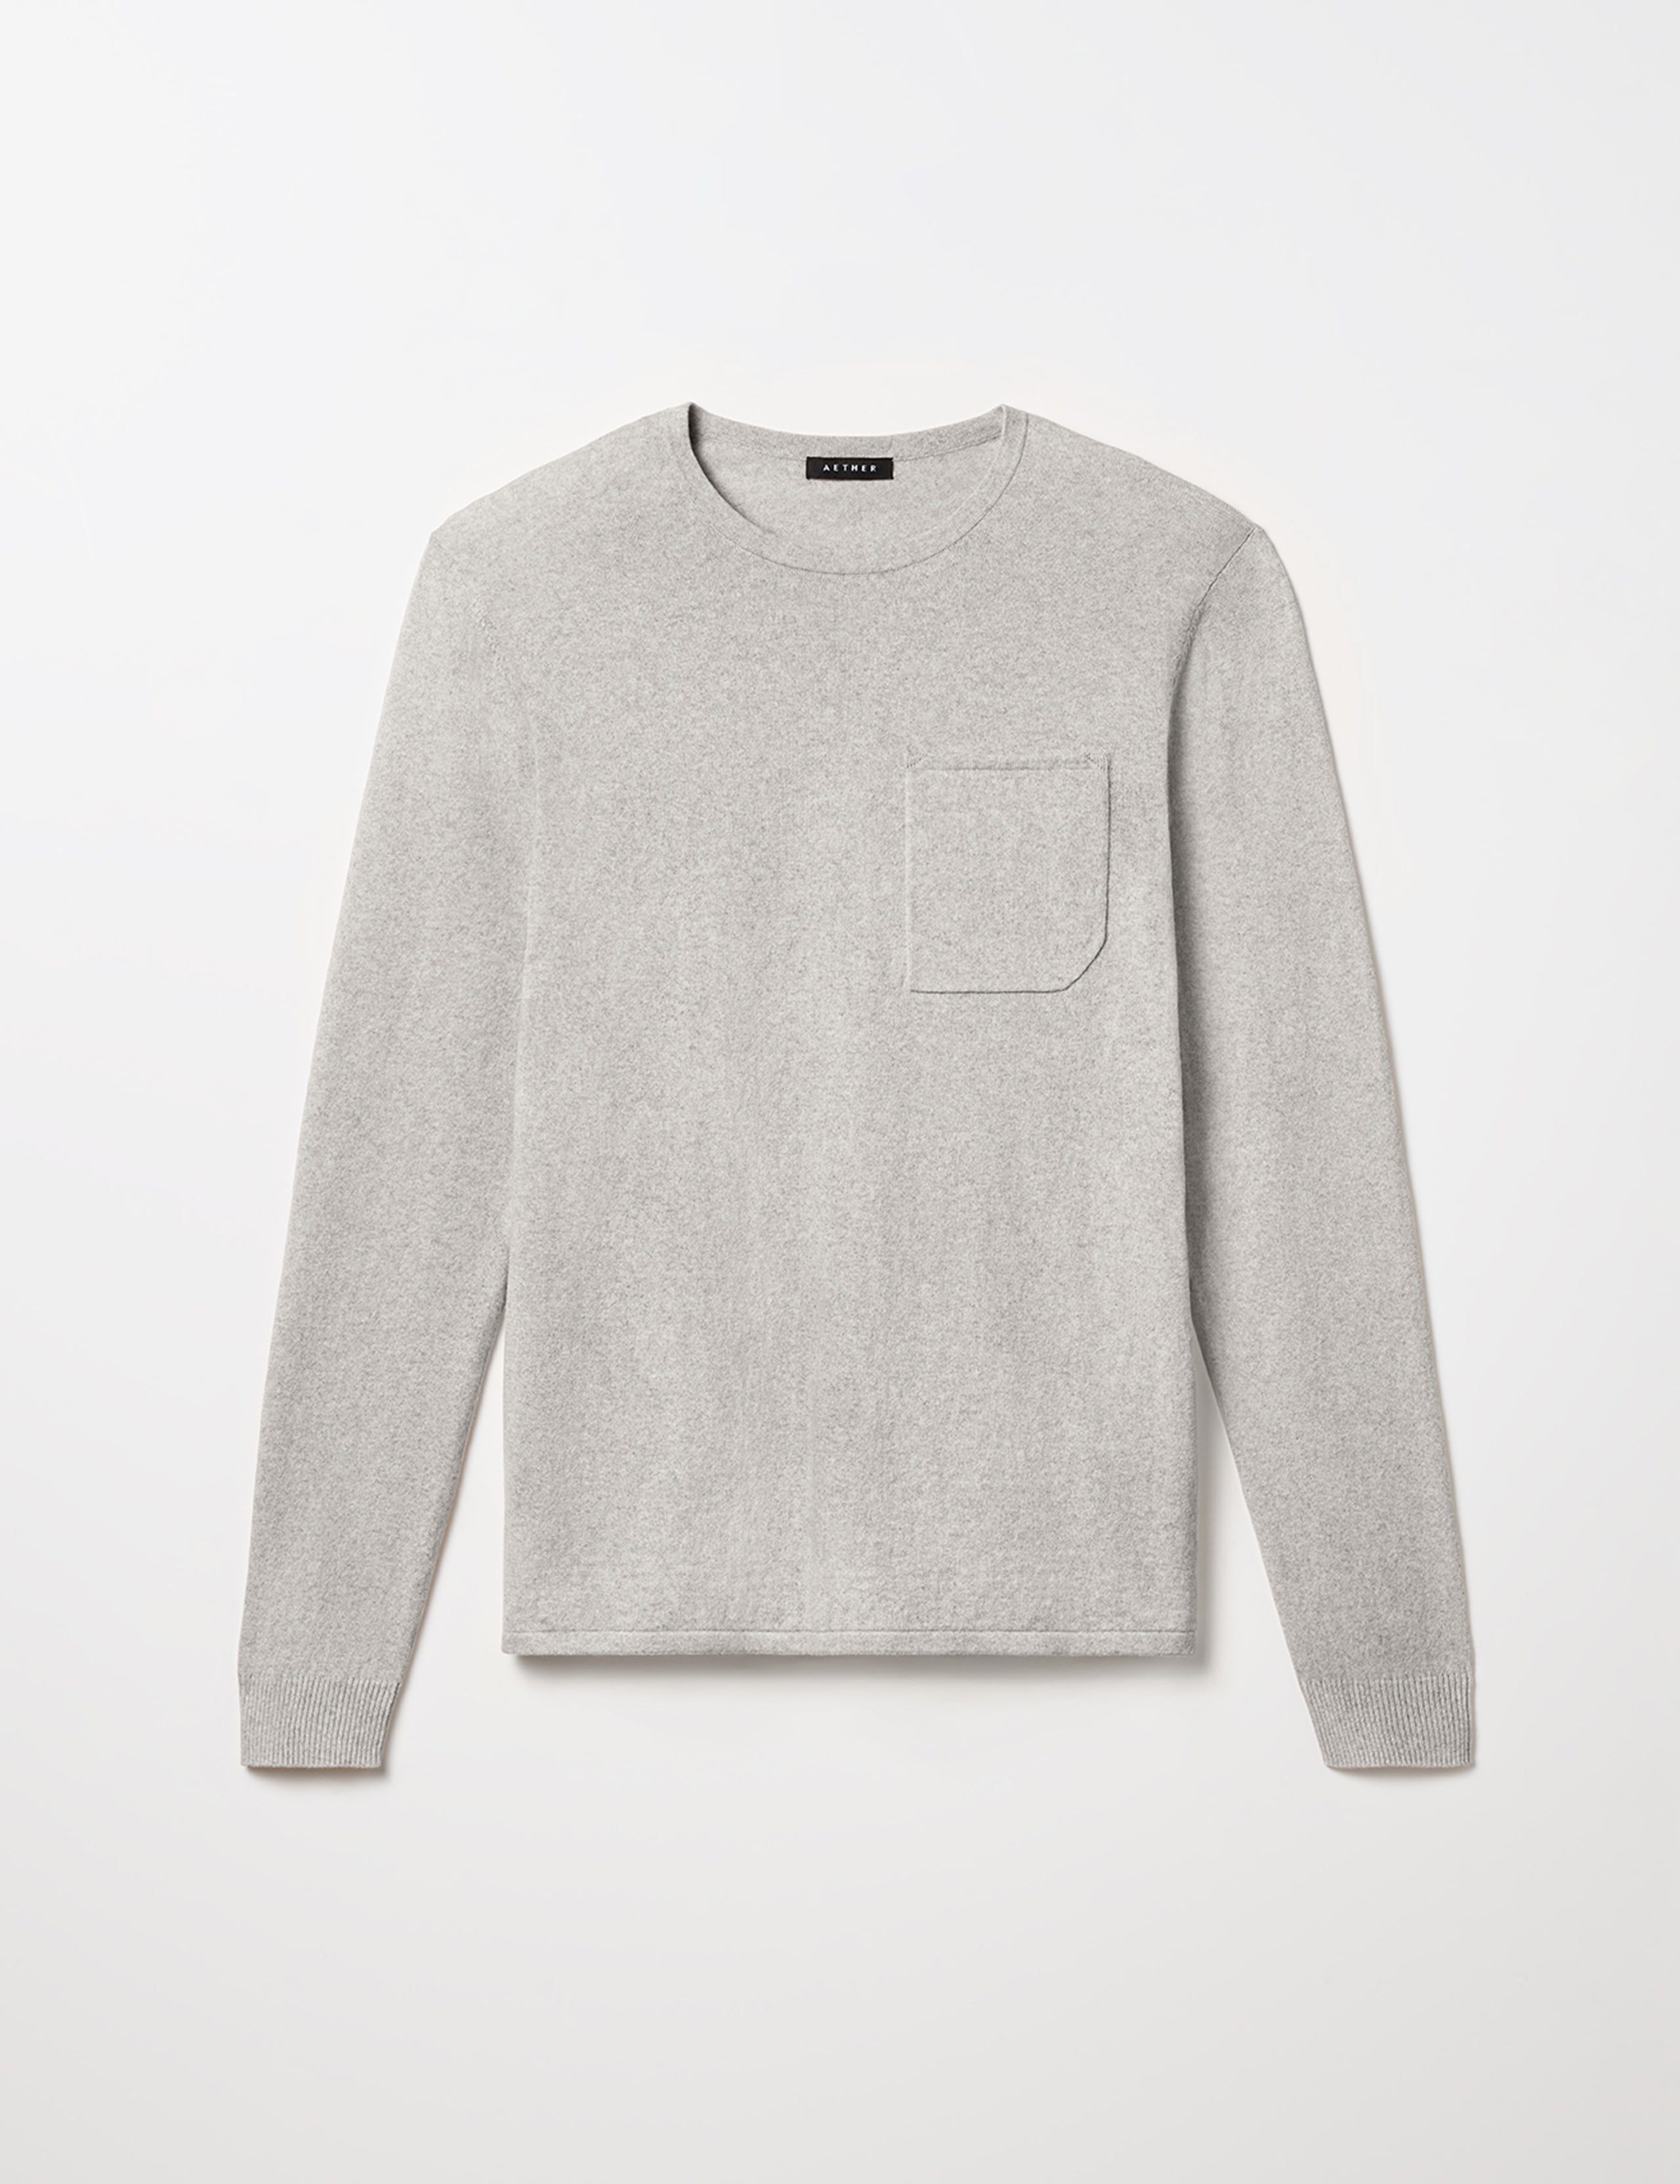 Lightweight light grey sweater from AETHER Apparel